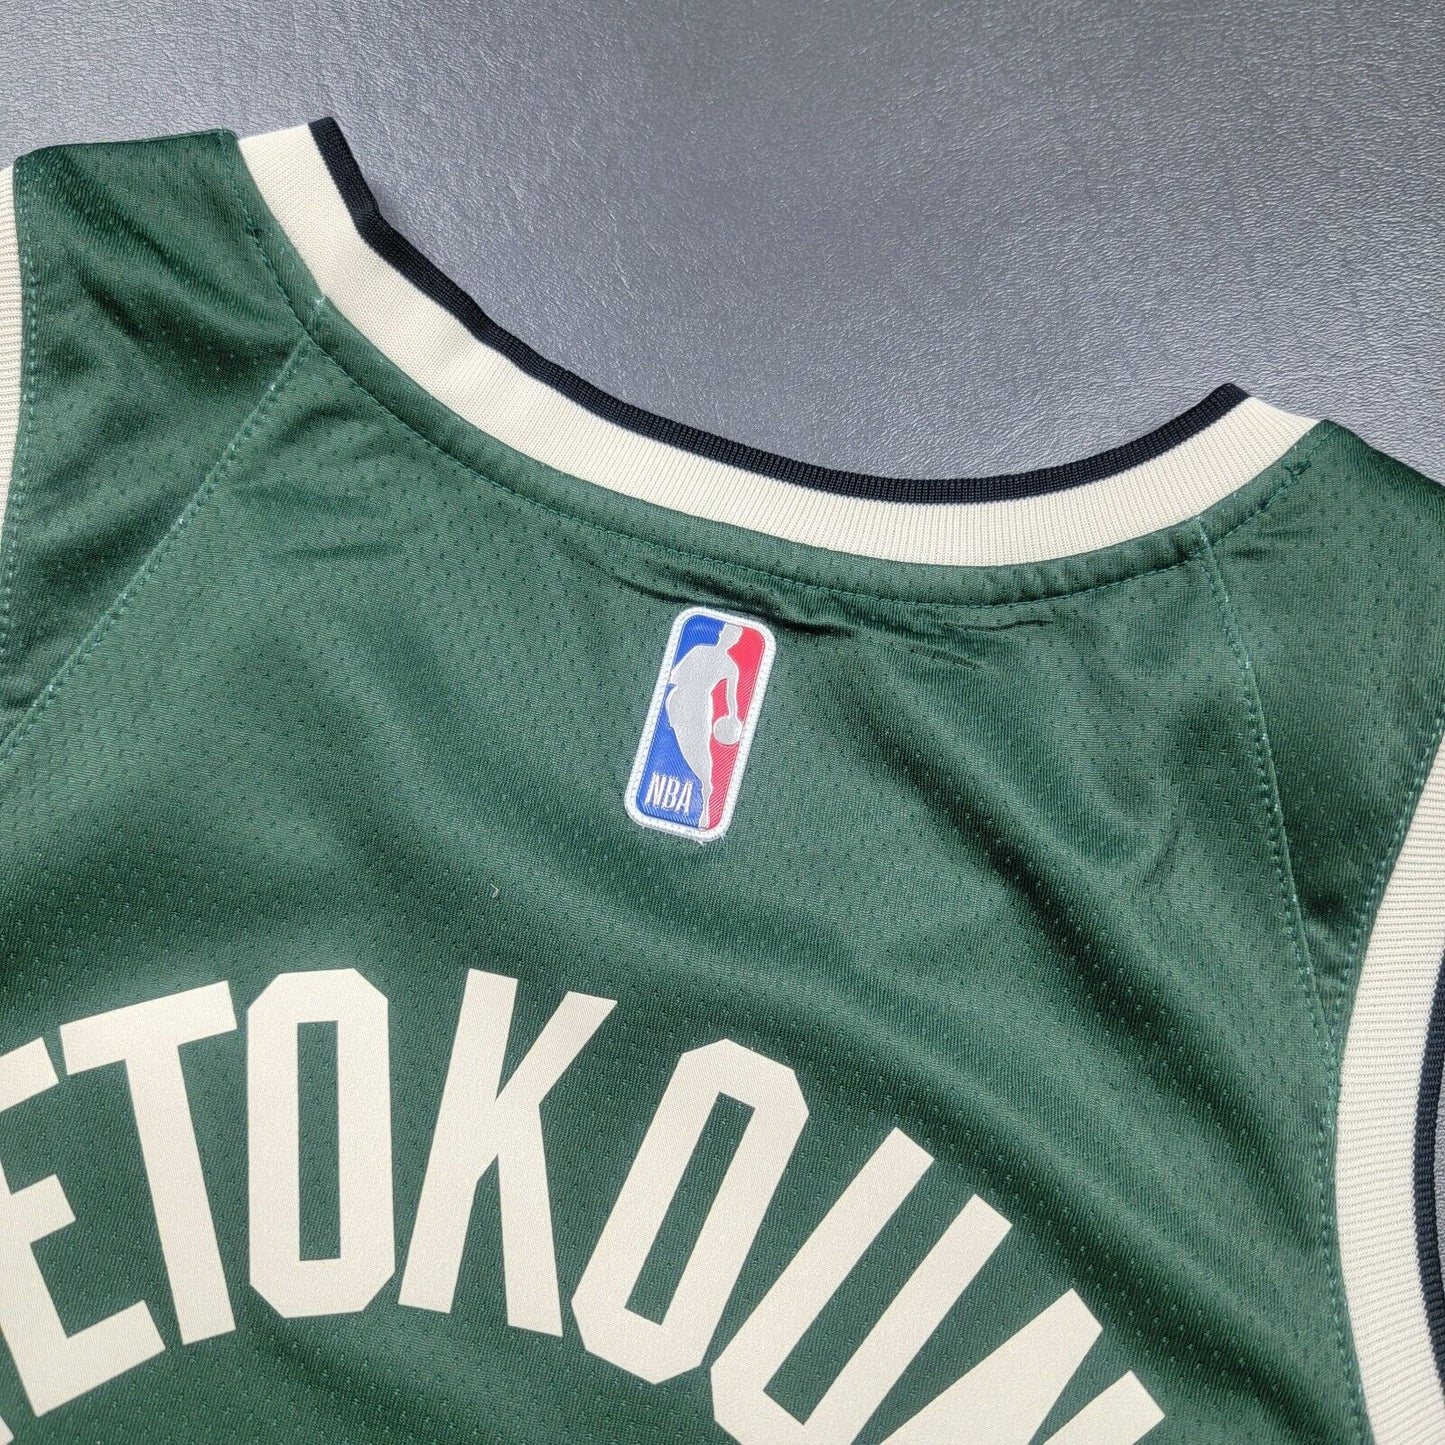 100% Authentic Giannis Antetokounmpo Nike Bucks Earned Edition Jersey Size 44 M